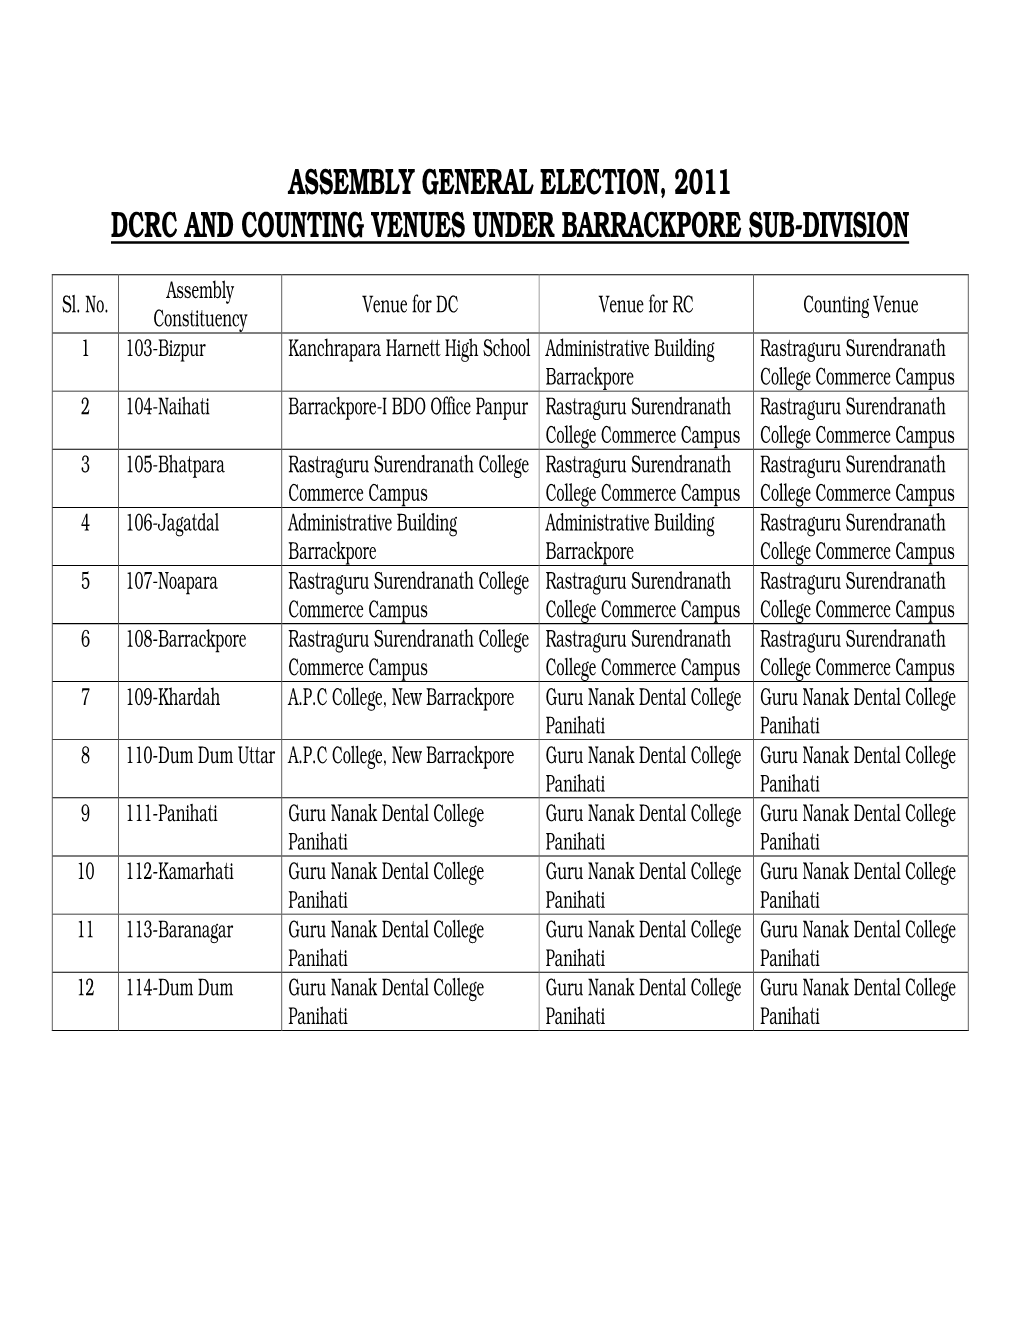 Assembly General Election, 2011 Dcrc and Counting Venues Under Barrackpore Sub-Division